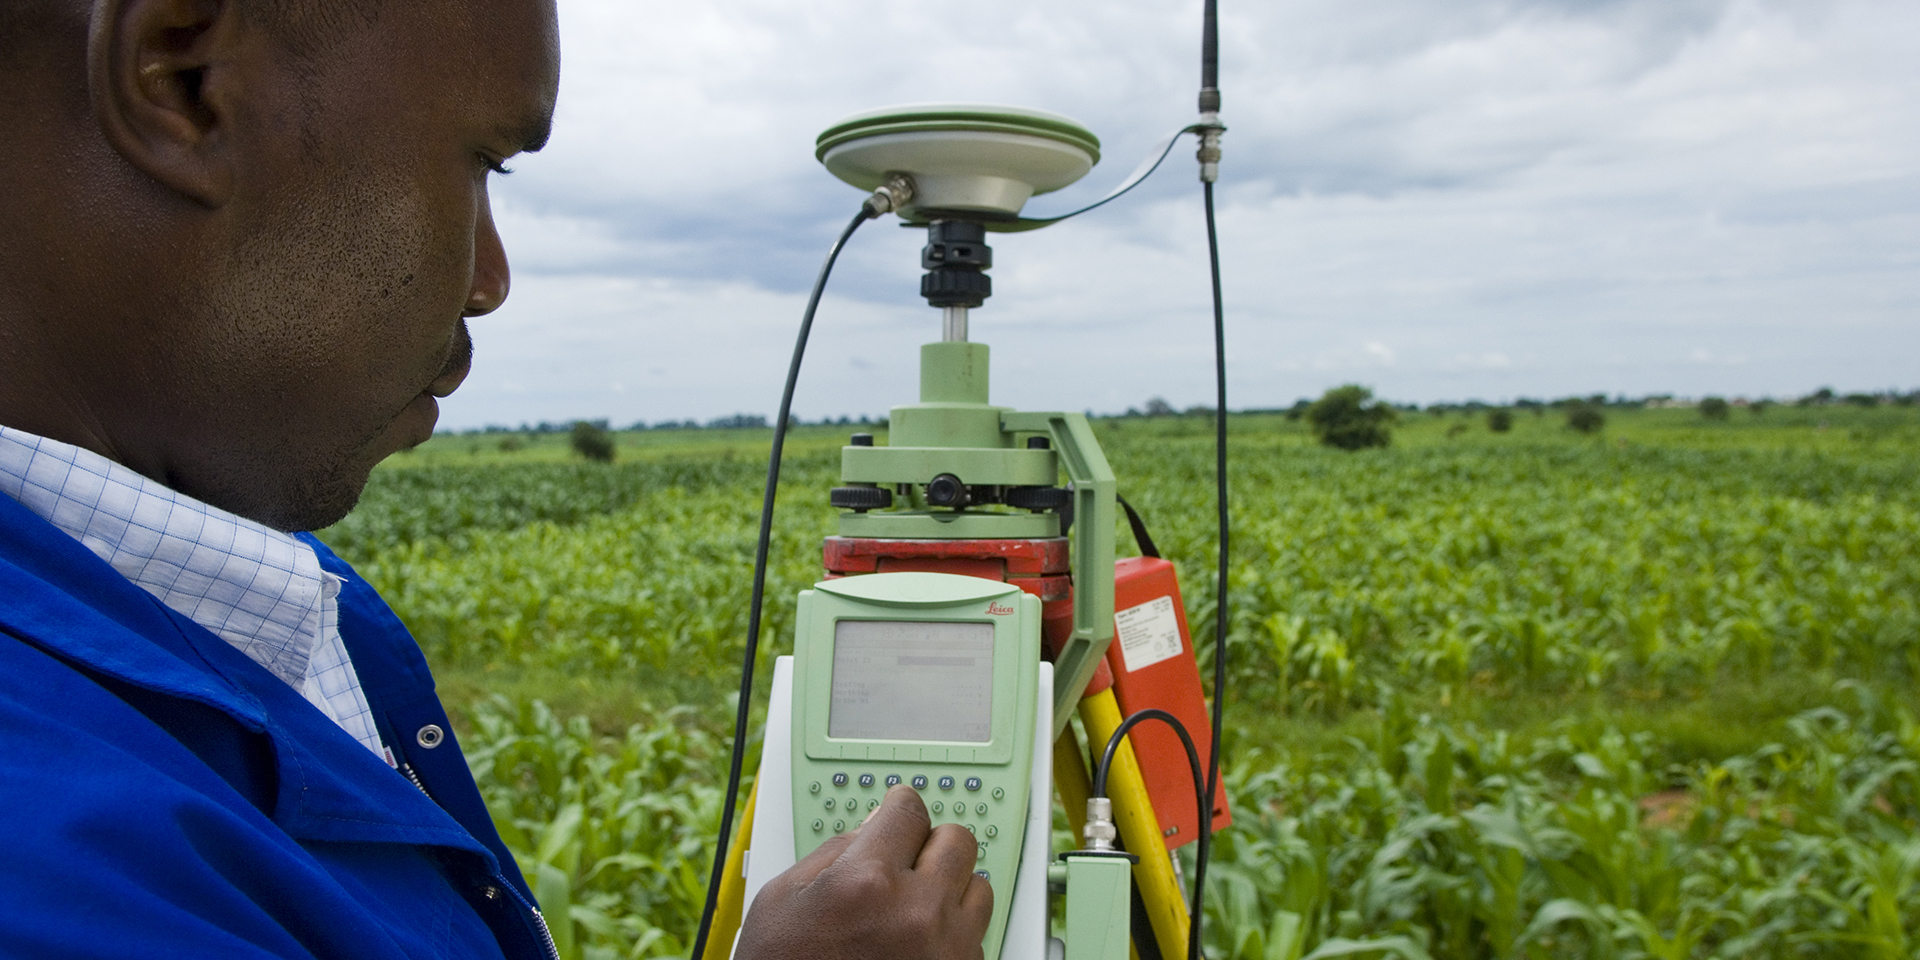 A man surveying farmland with a large green device with a keypad he is using to input figures.